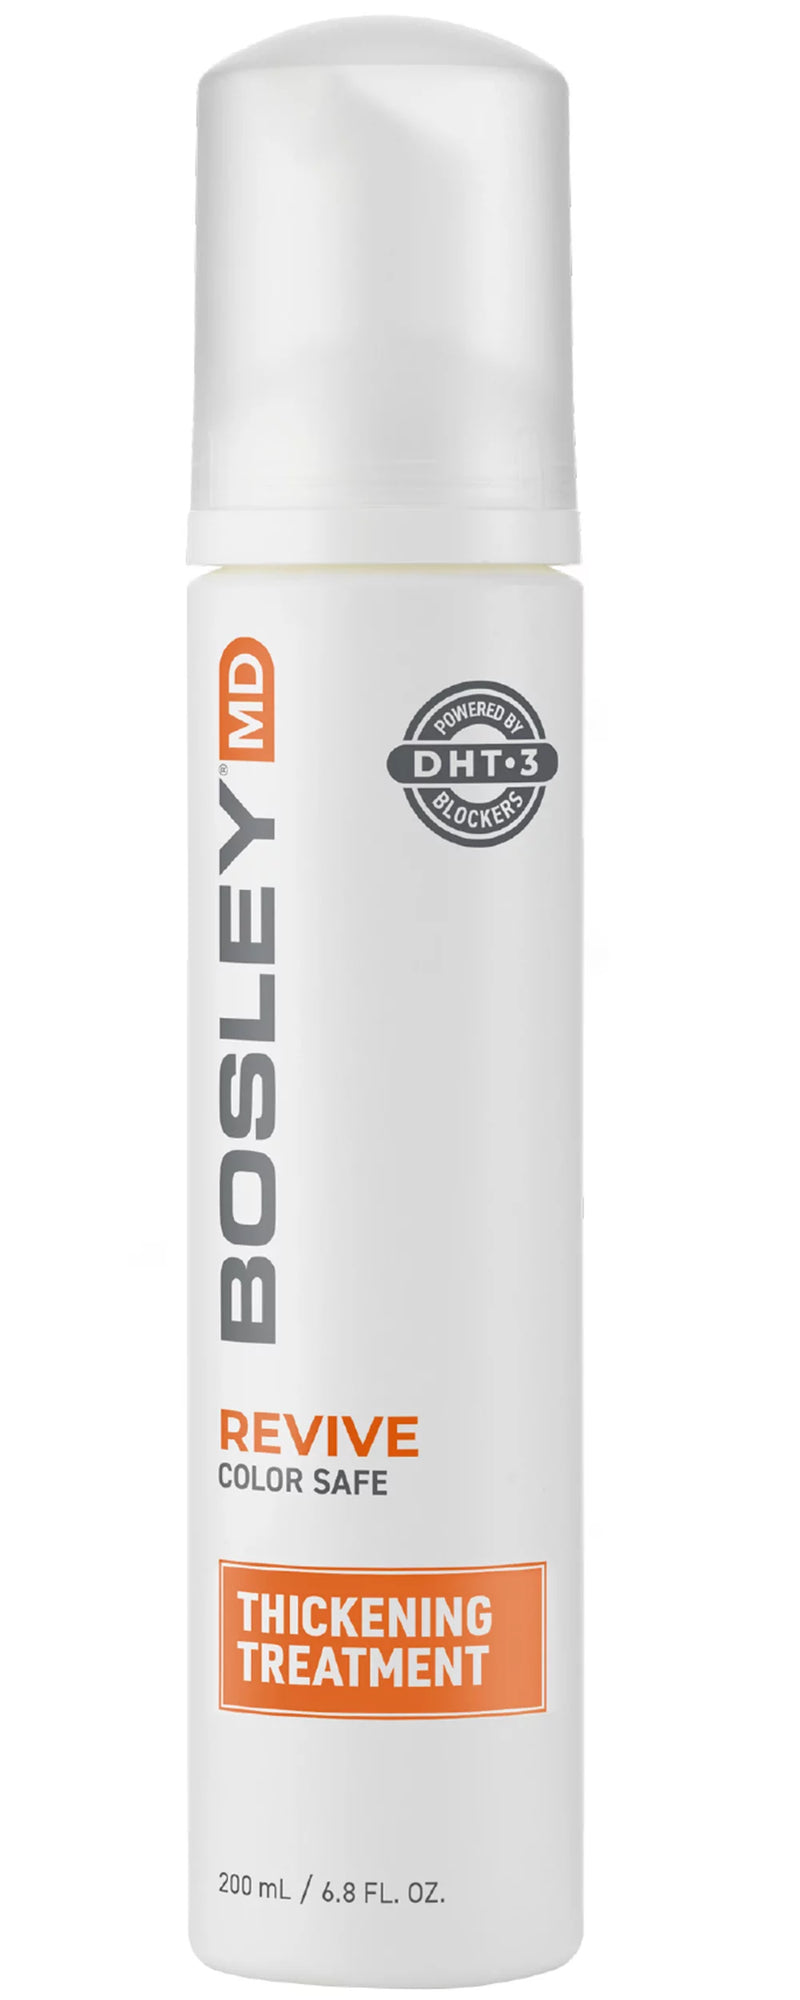 BosRevive Color Safe Thickening Treatment,